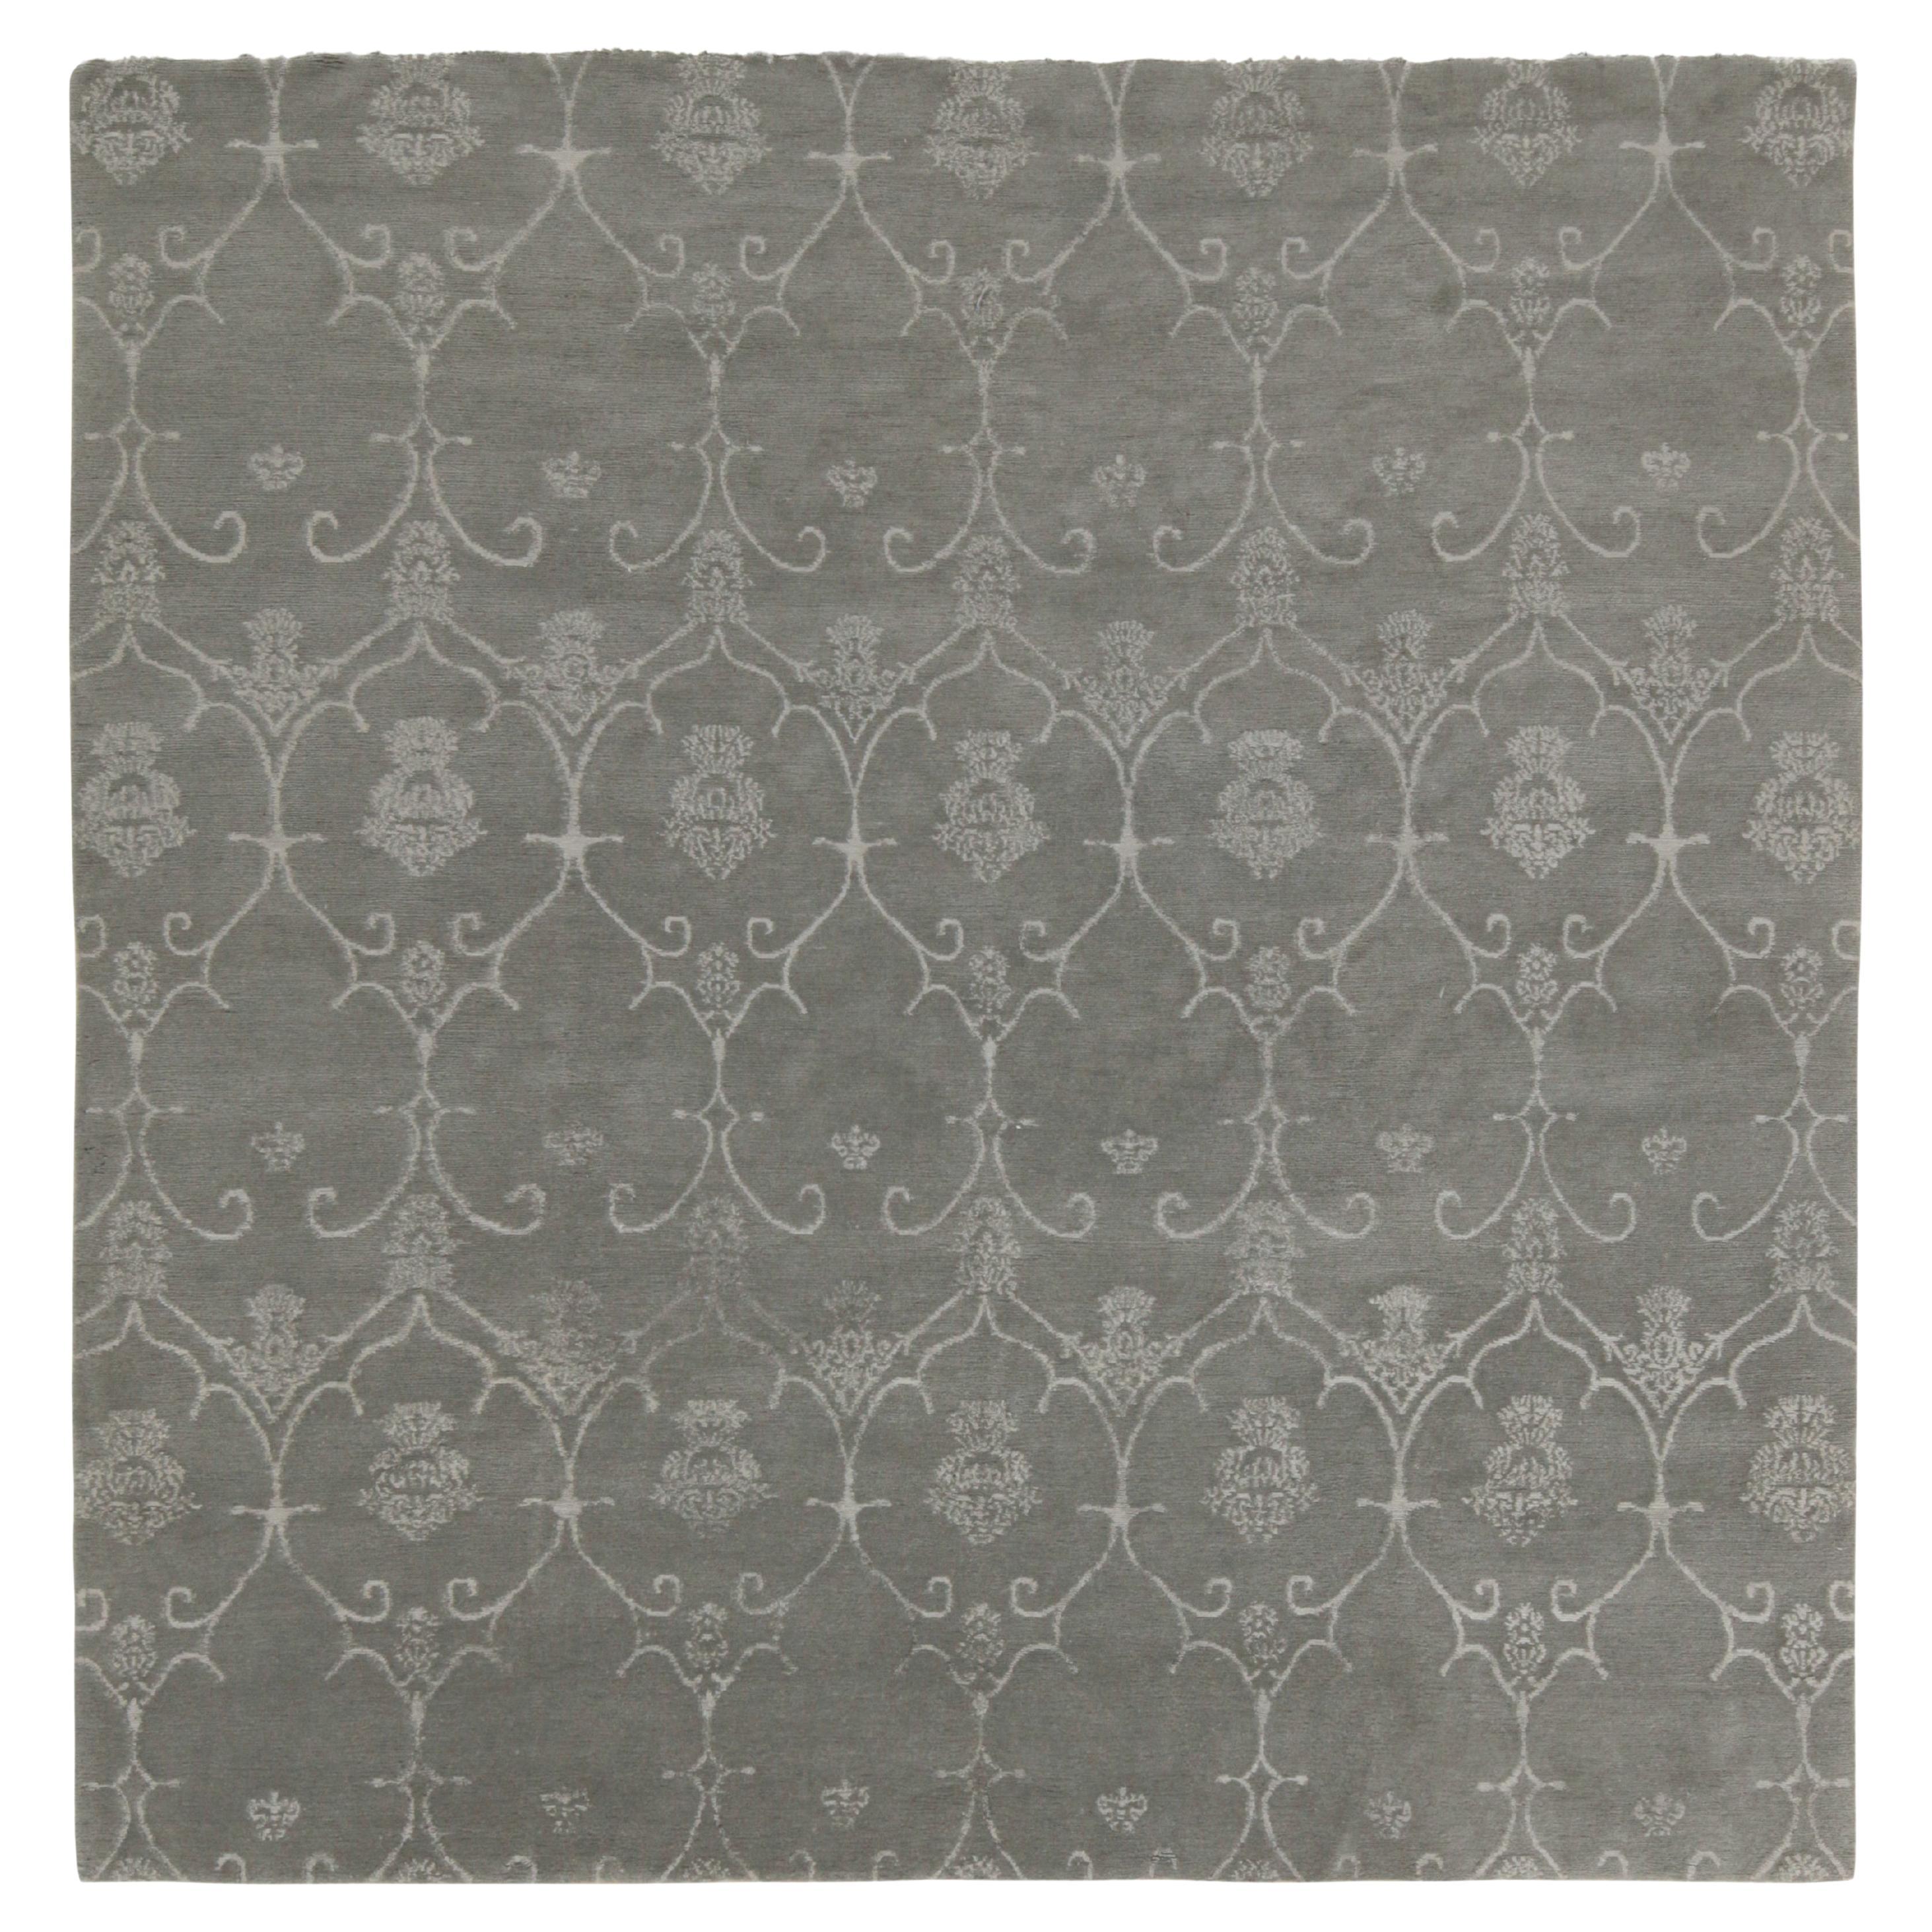 Rug & Kilim’s Classic Style Square Rug in Grey with Floral Trellis Patterns For Sale